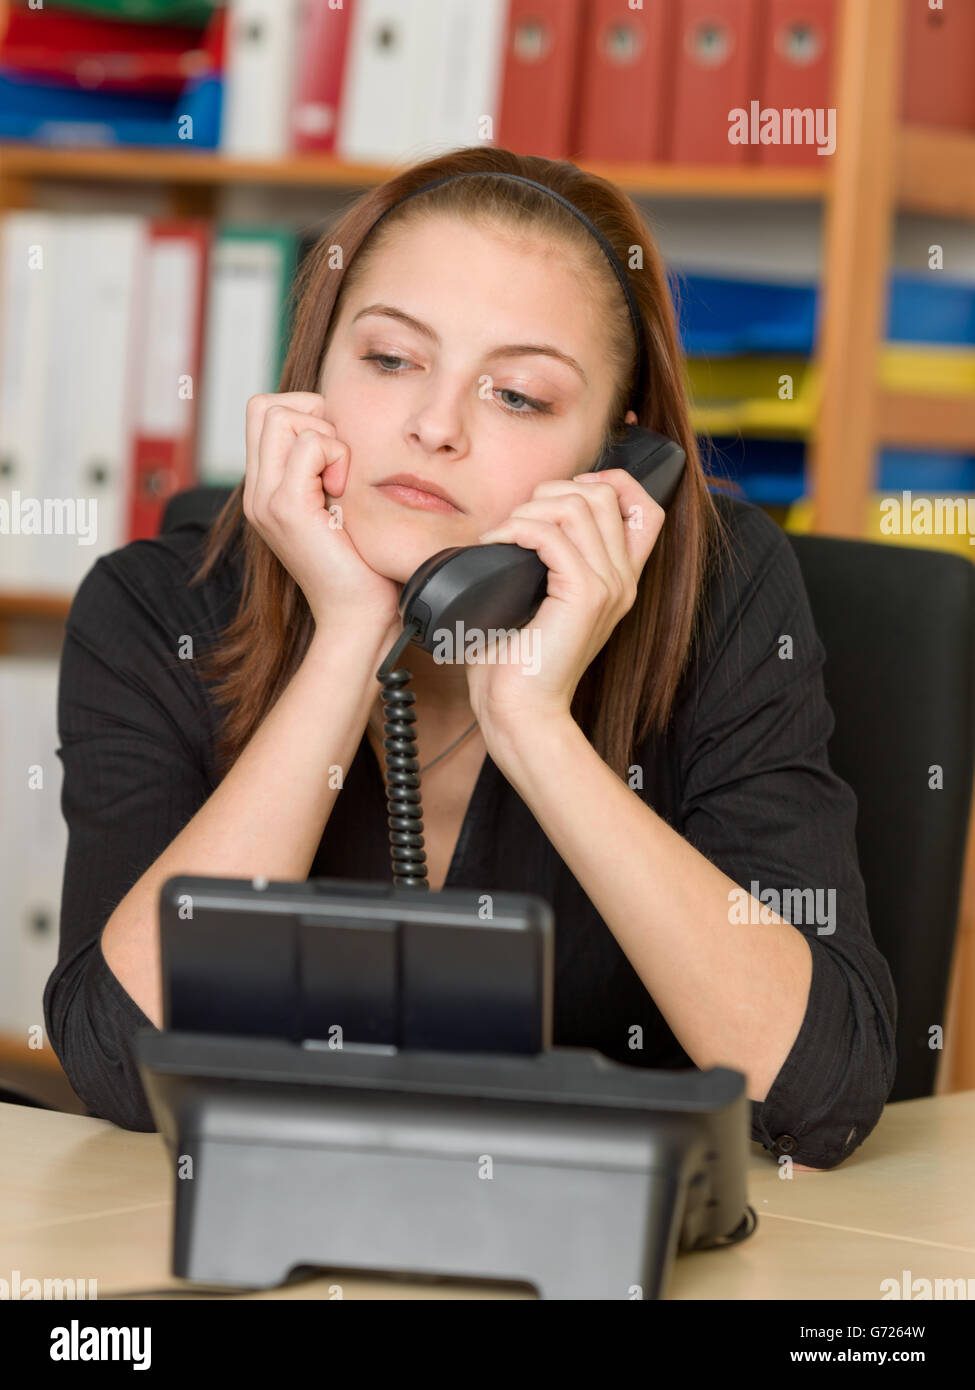 Bored female office worker making a telephone call Stock Photo